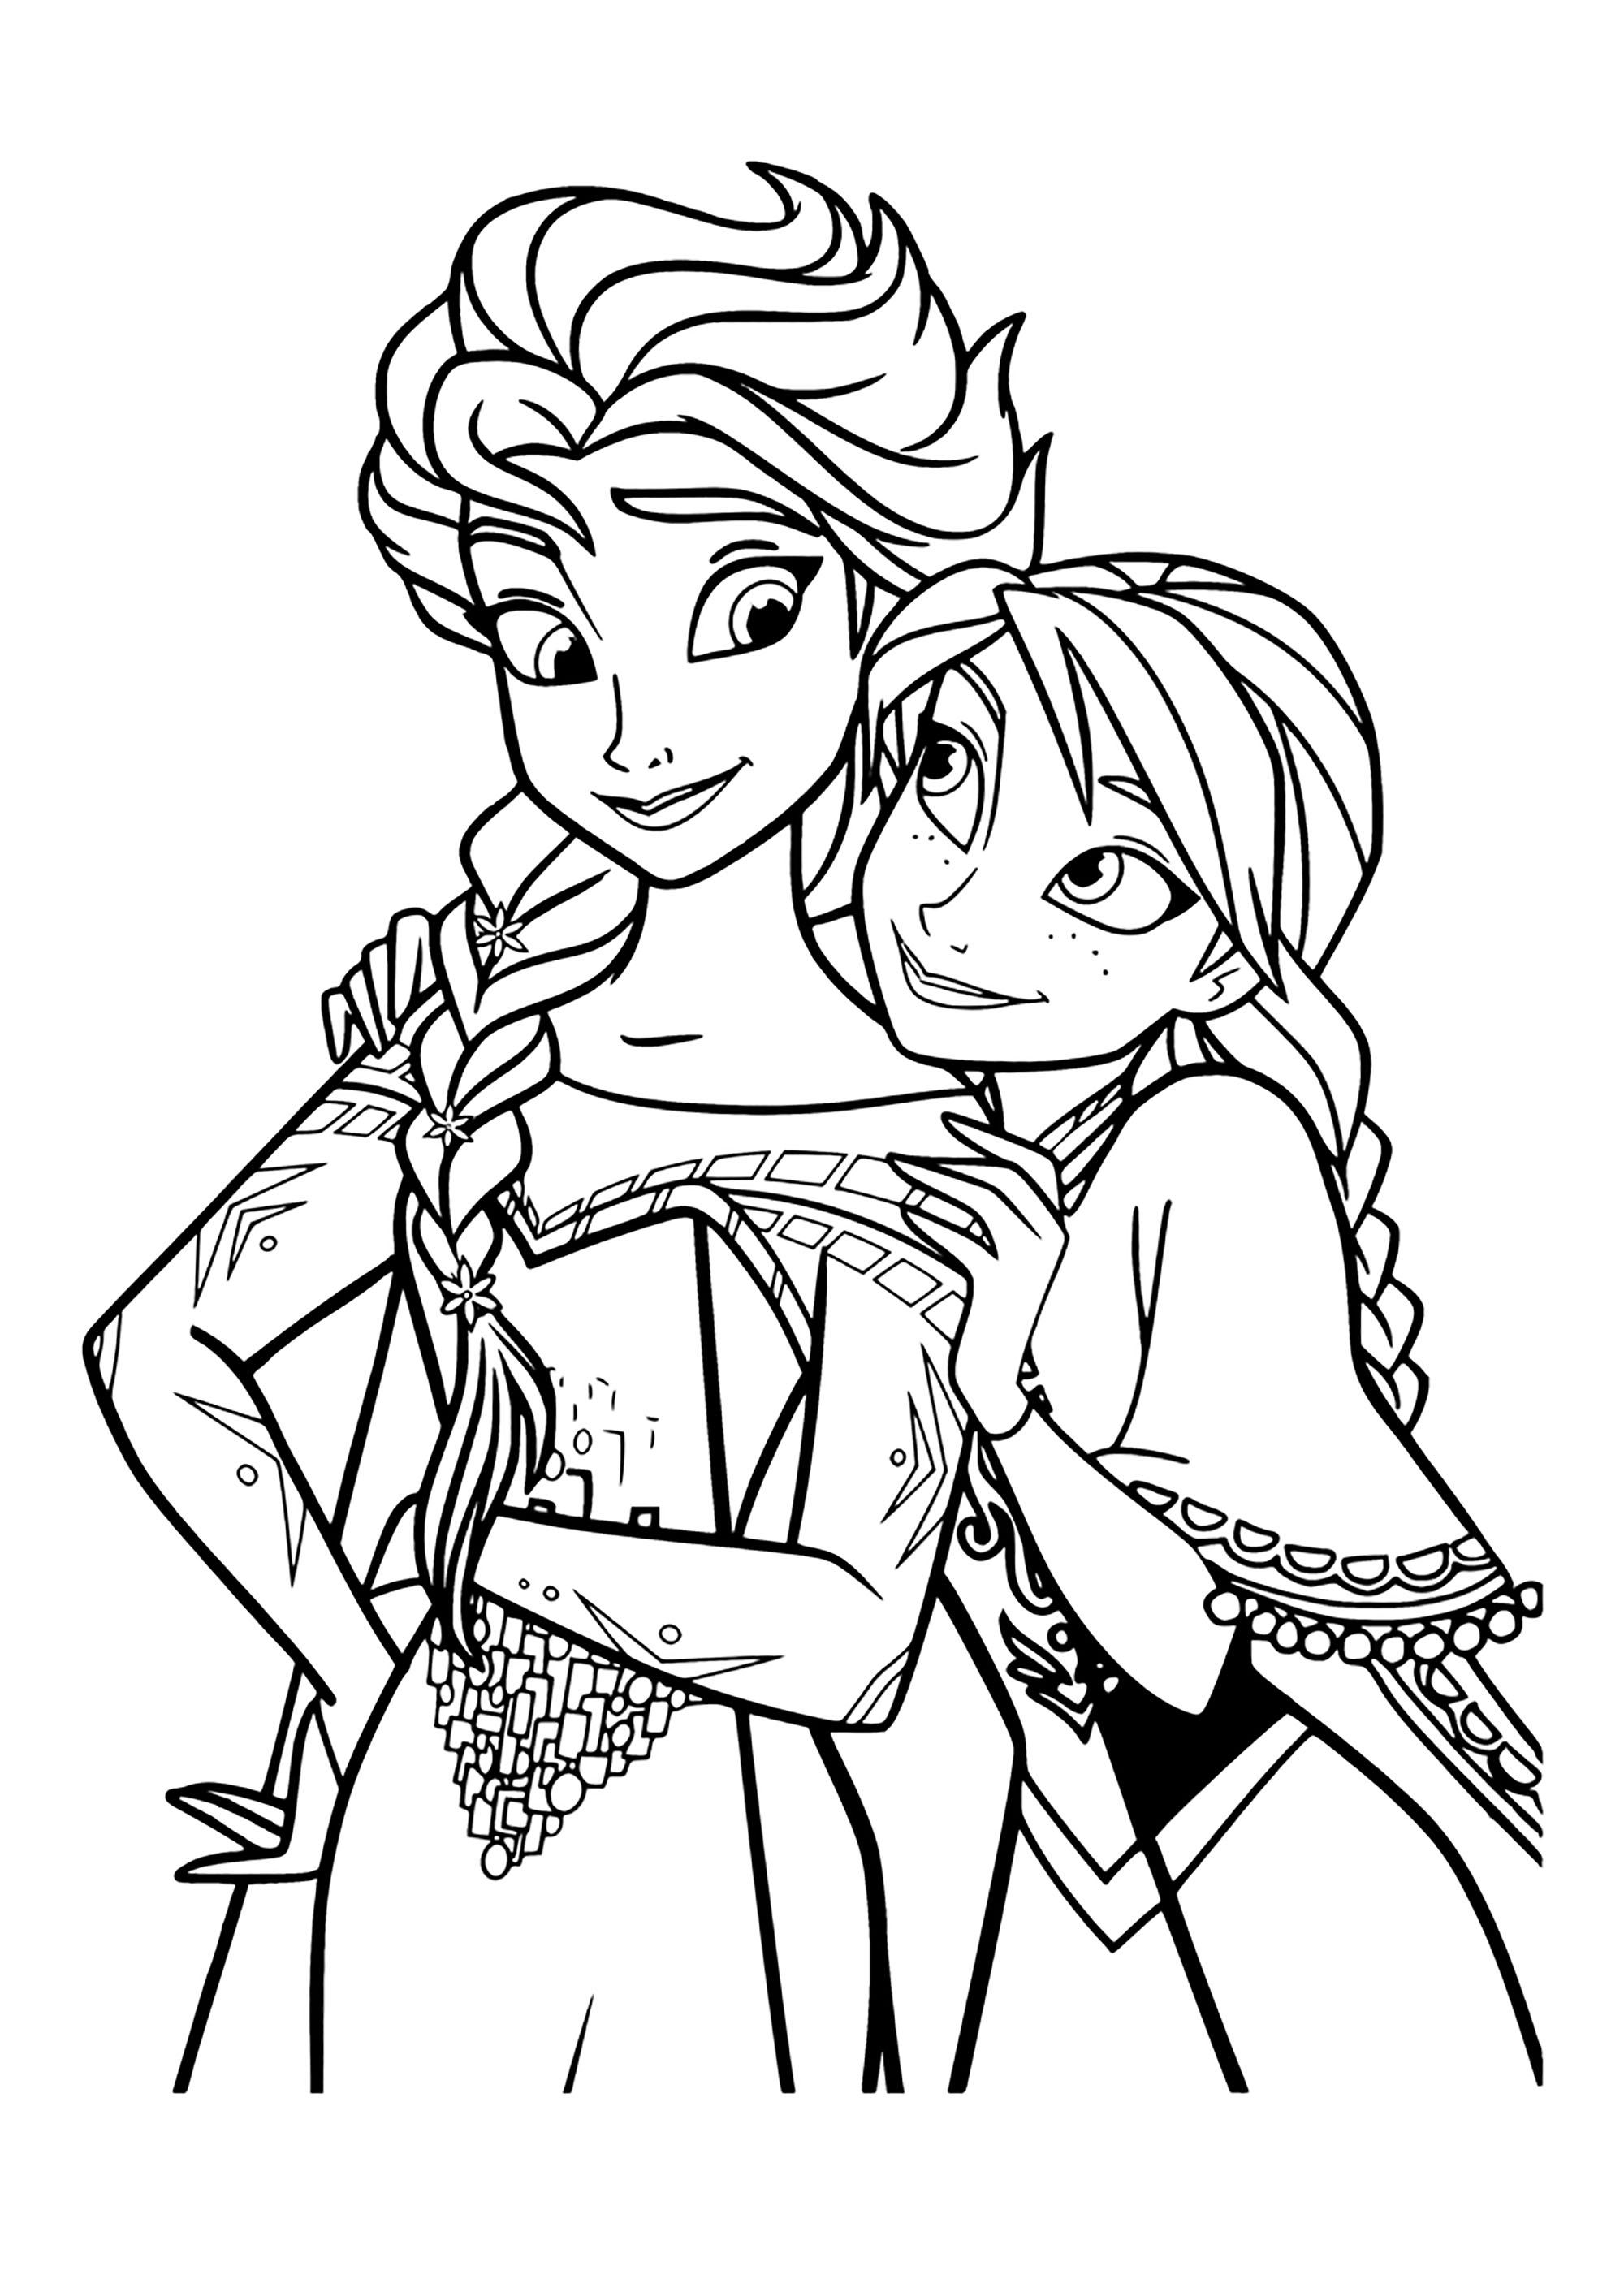 the-snow-queen-2-anna-and-elsa-as-accomplices-frozen-2-kids-coloring-pages